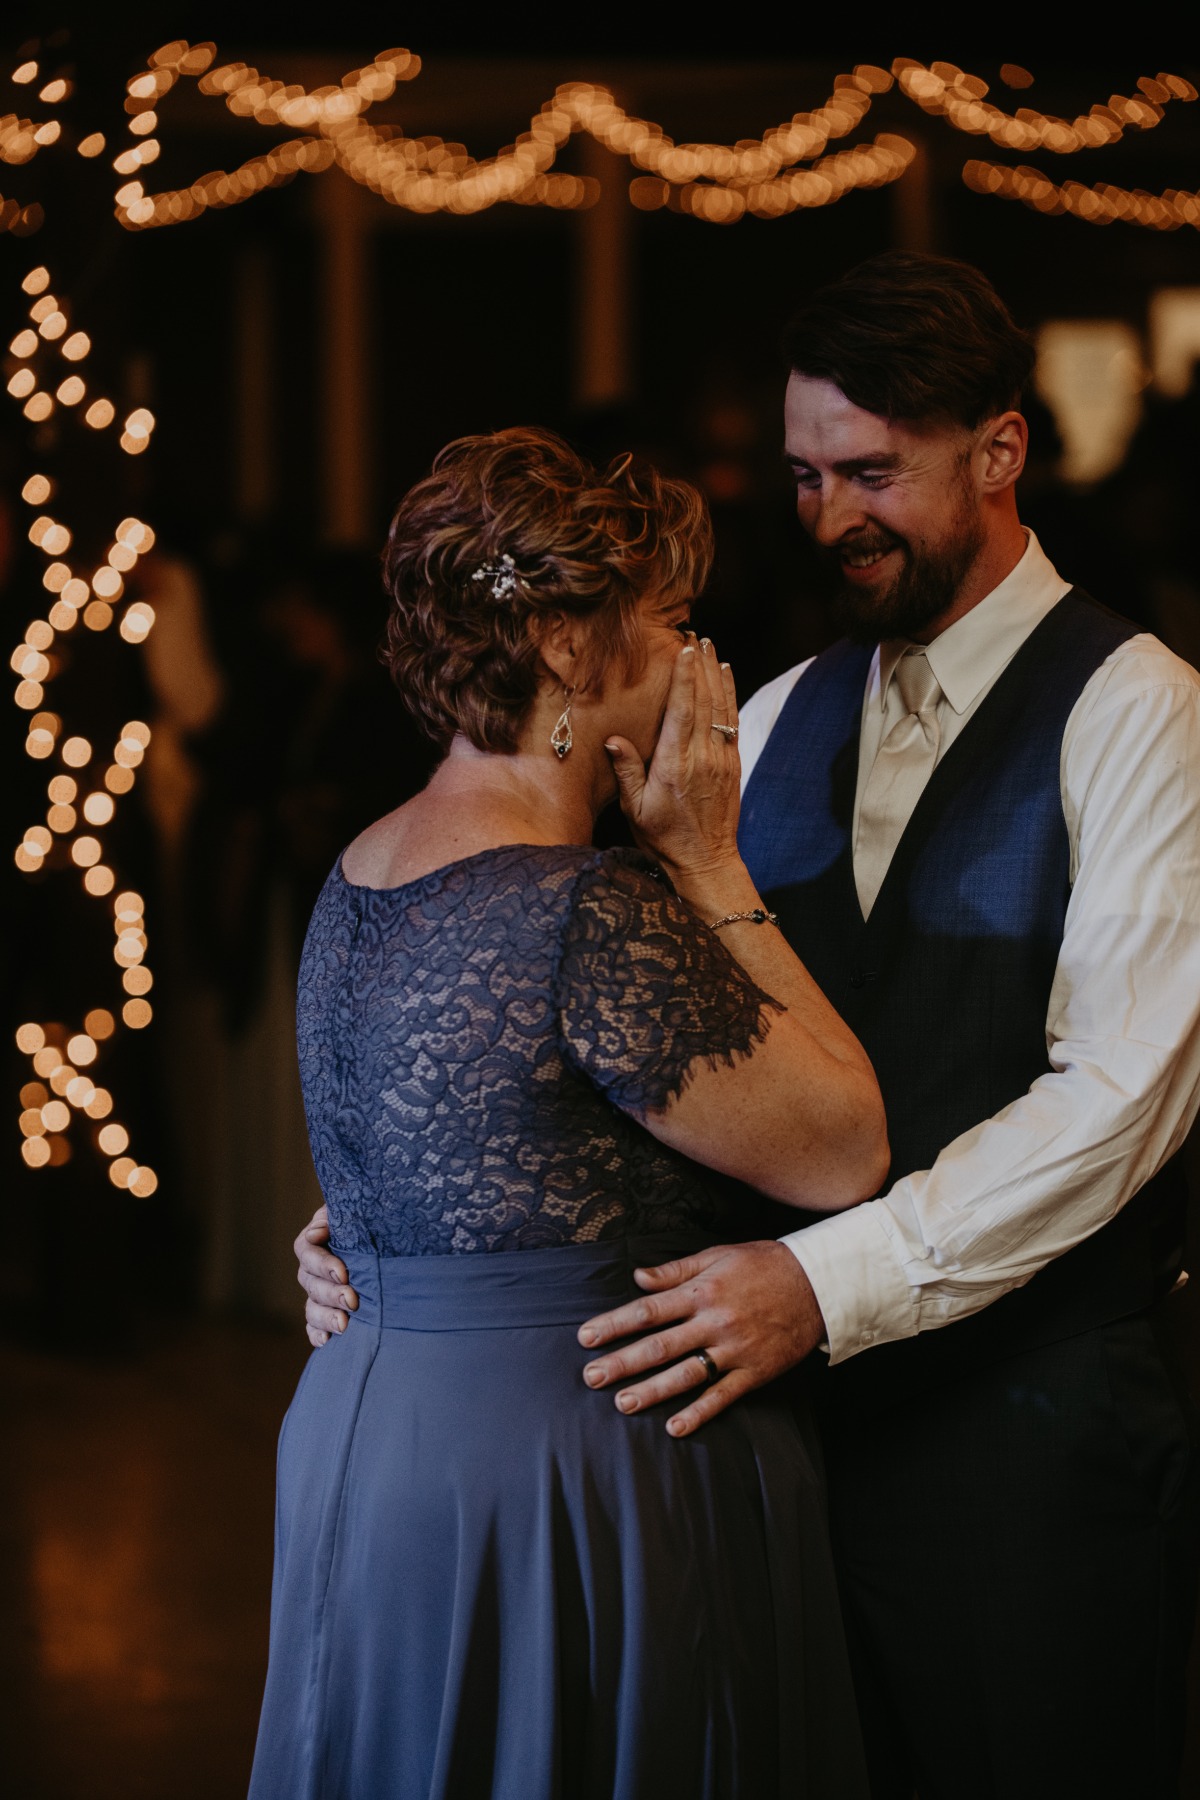 This Rustic Indiana Wedding Looks Like A Real Good Time